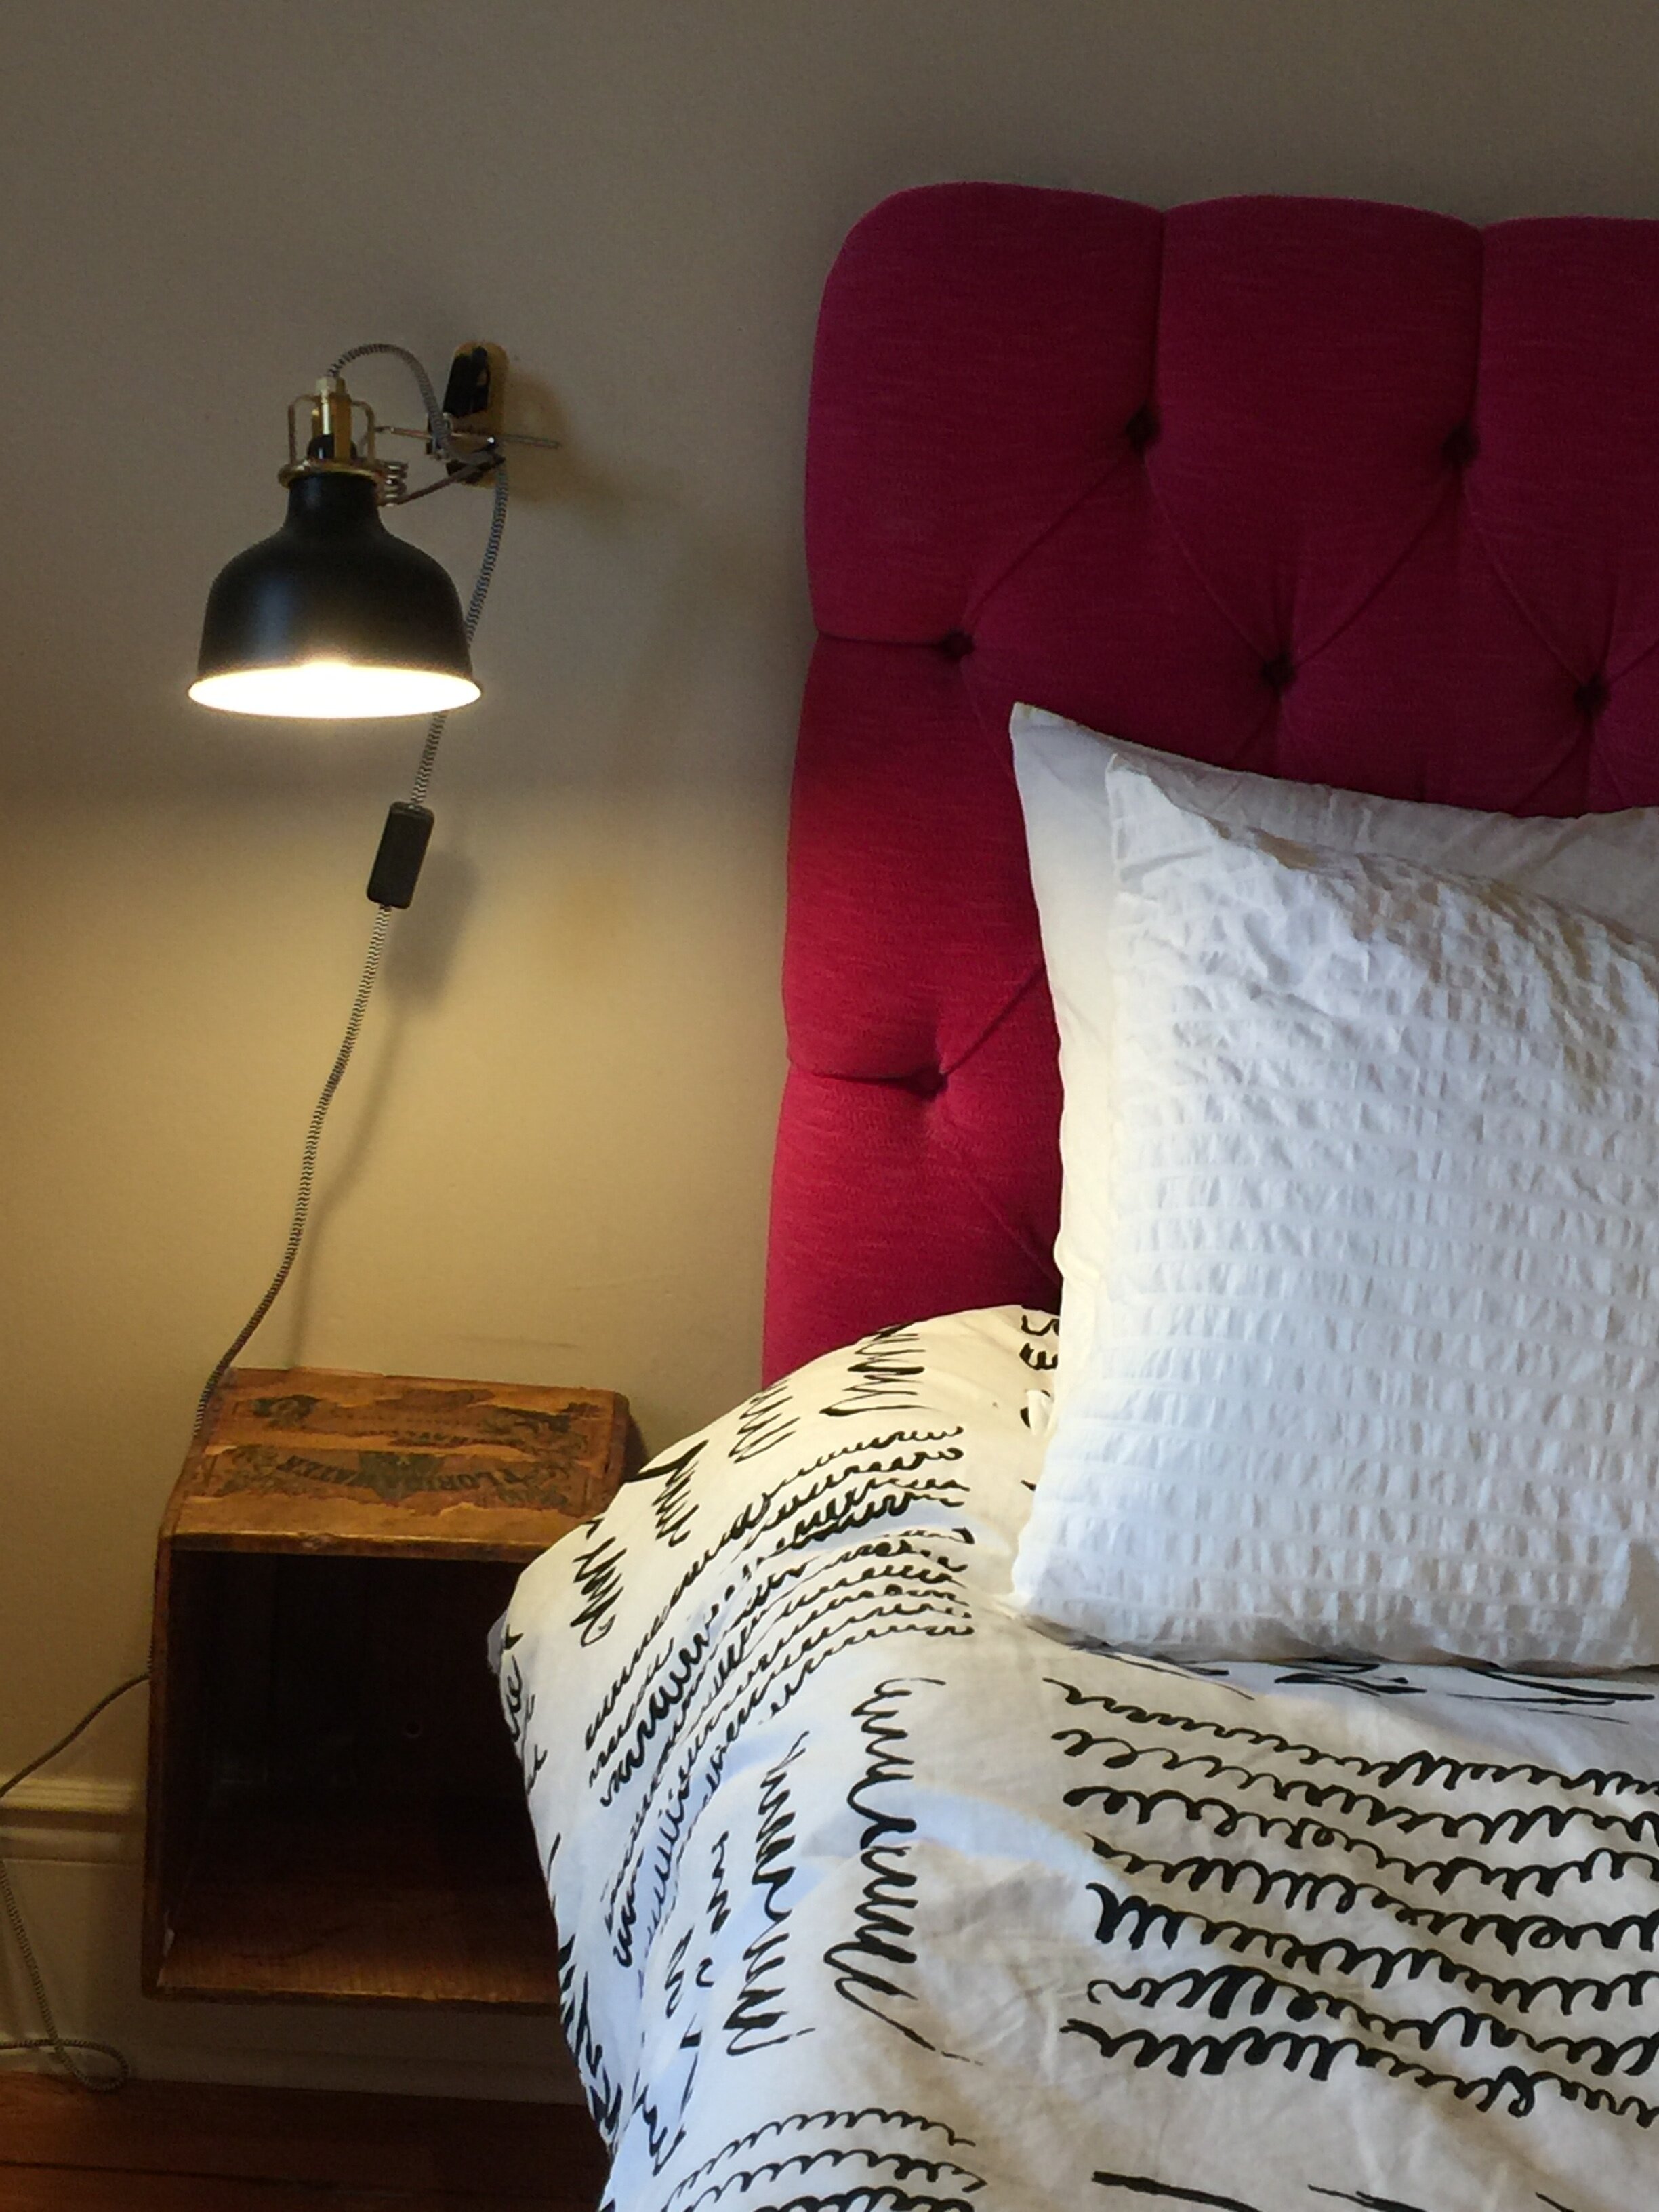  My favourite IKEA wall light, Ranarp, and an old butter crate as a bed side table.  